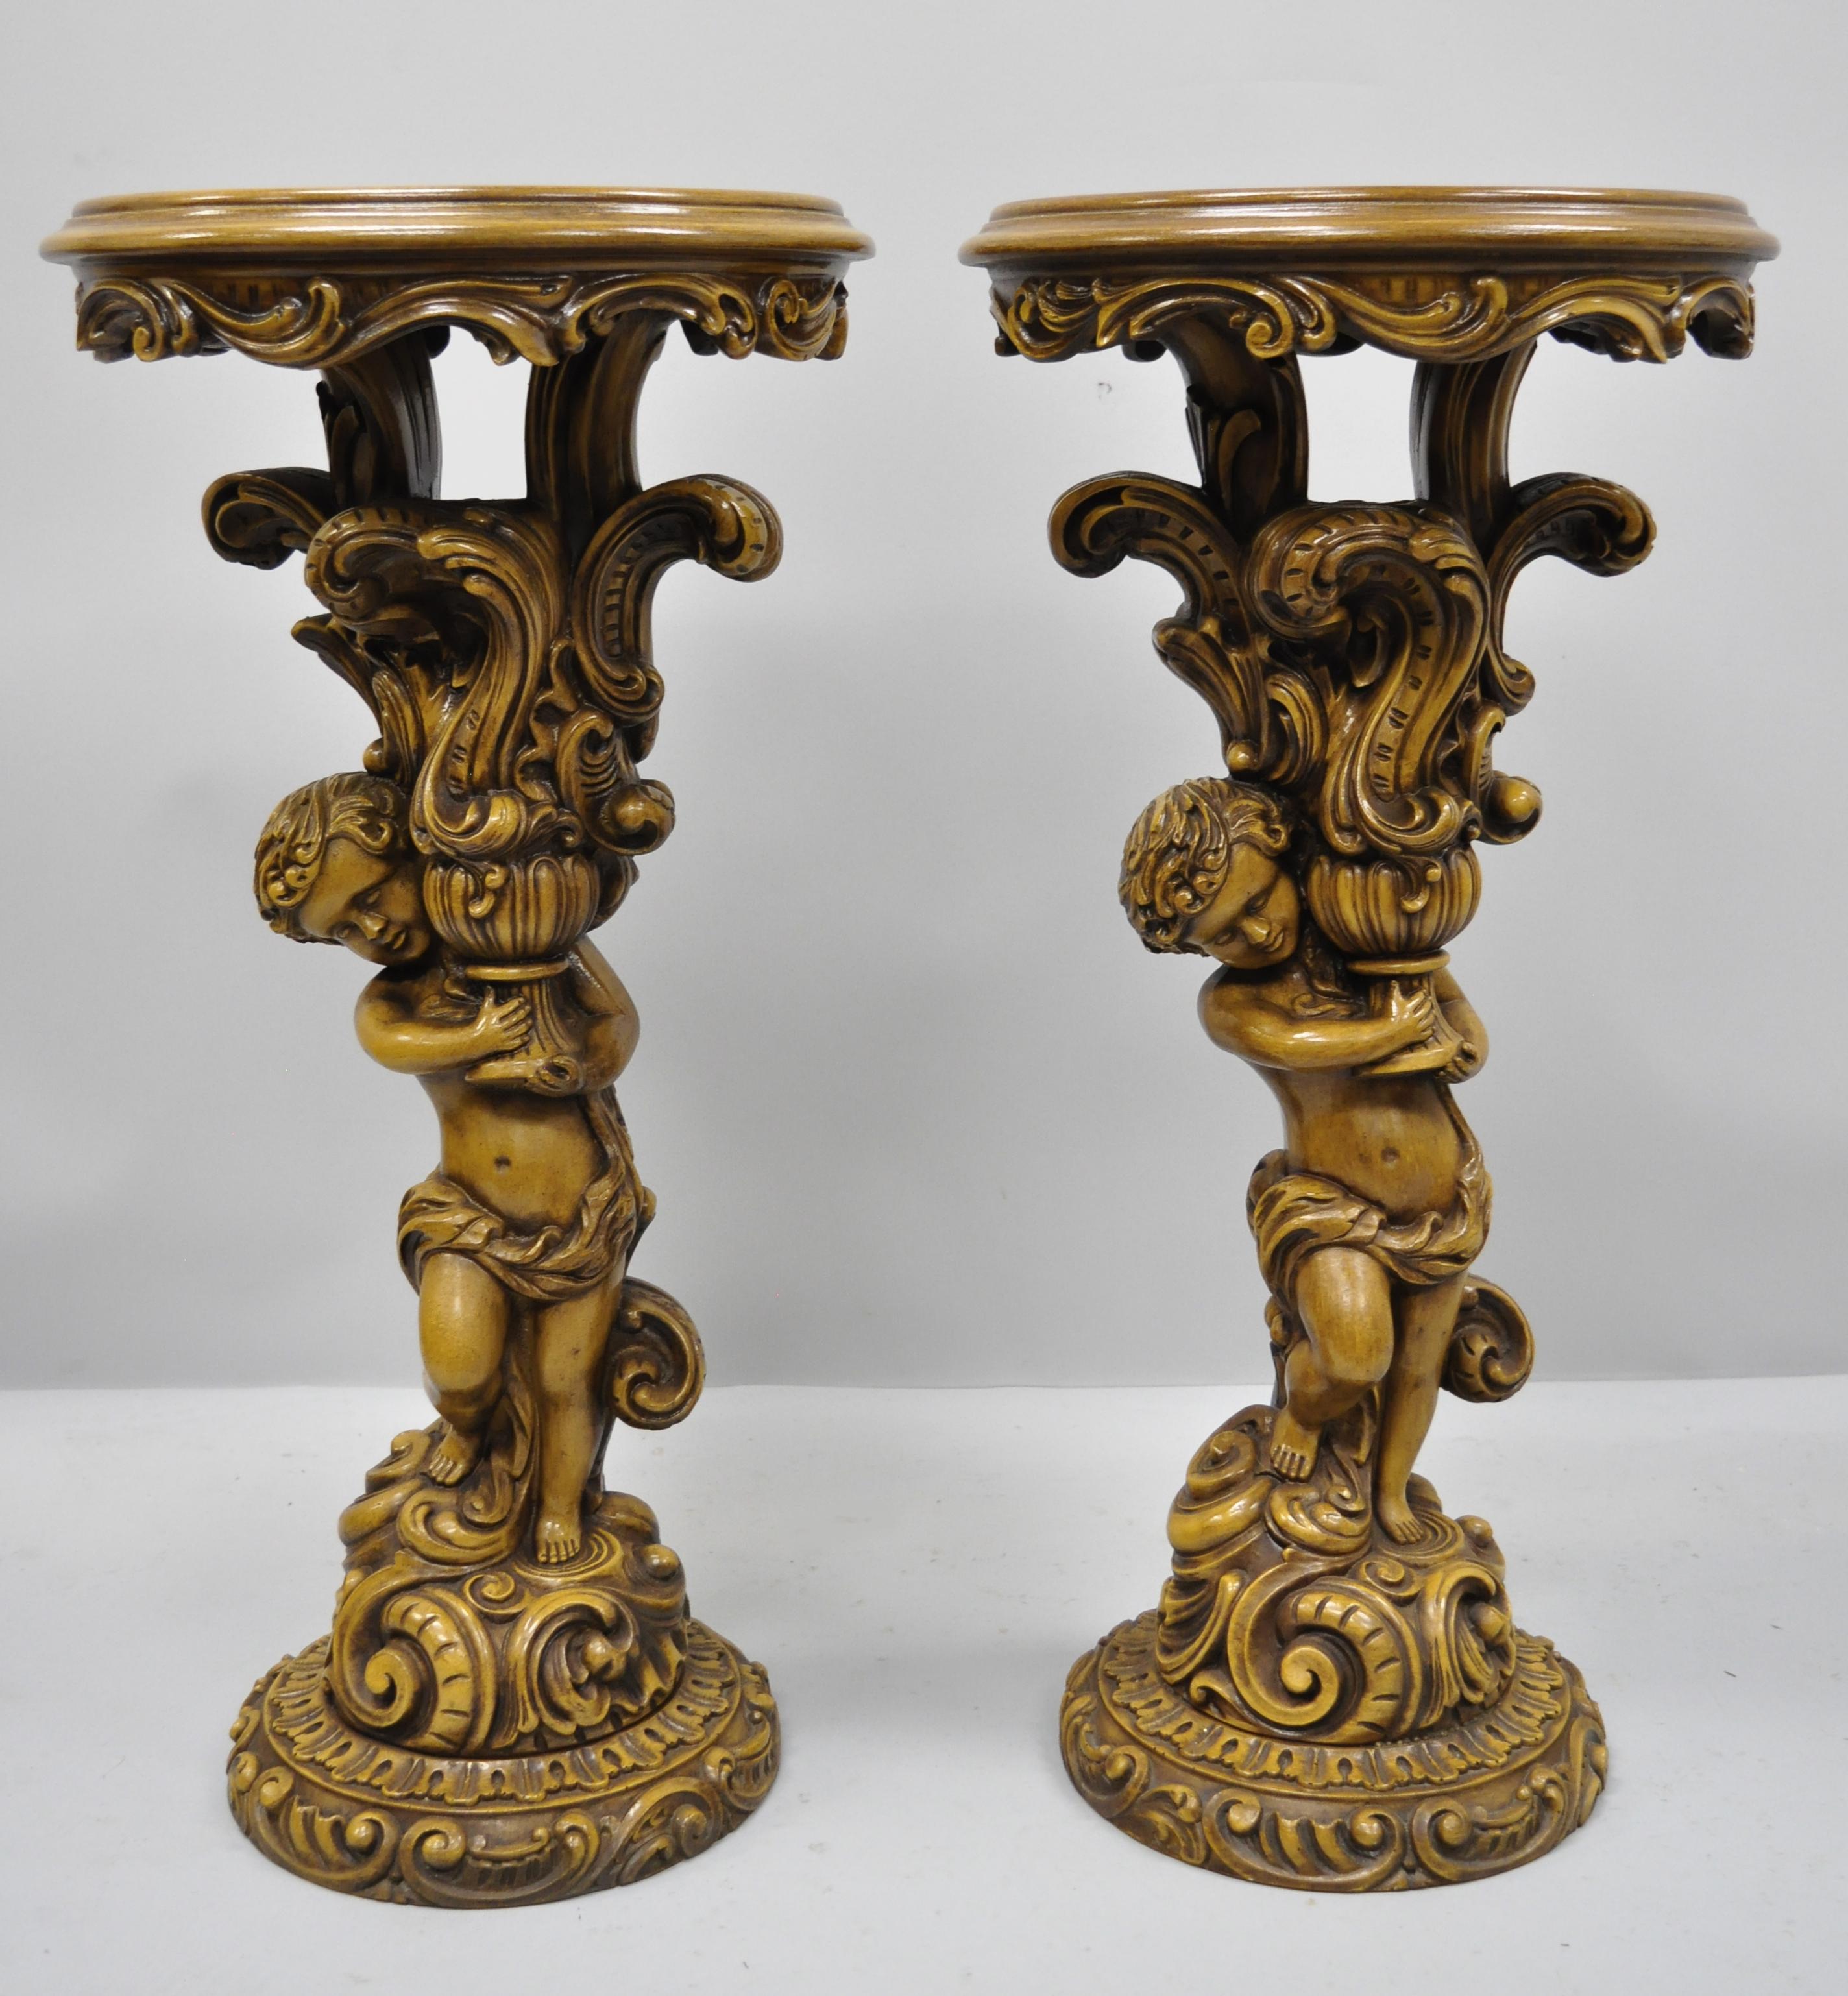 Pair of French Rococo style figural Cherub Angel pedestal plant stands table. Items feature round inset glass tops, figural cherub support columns, and great style and form, circa mid to late 20th century. Measurements: 33